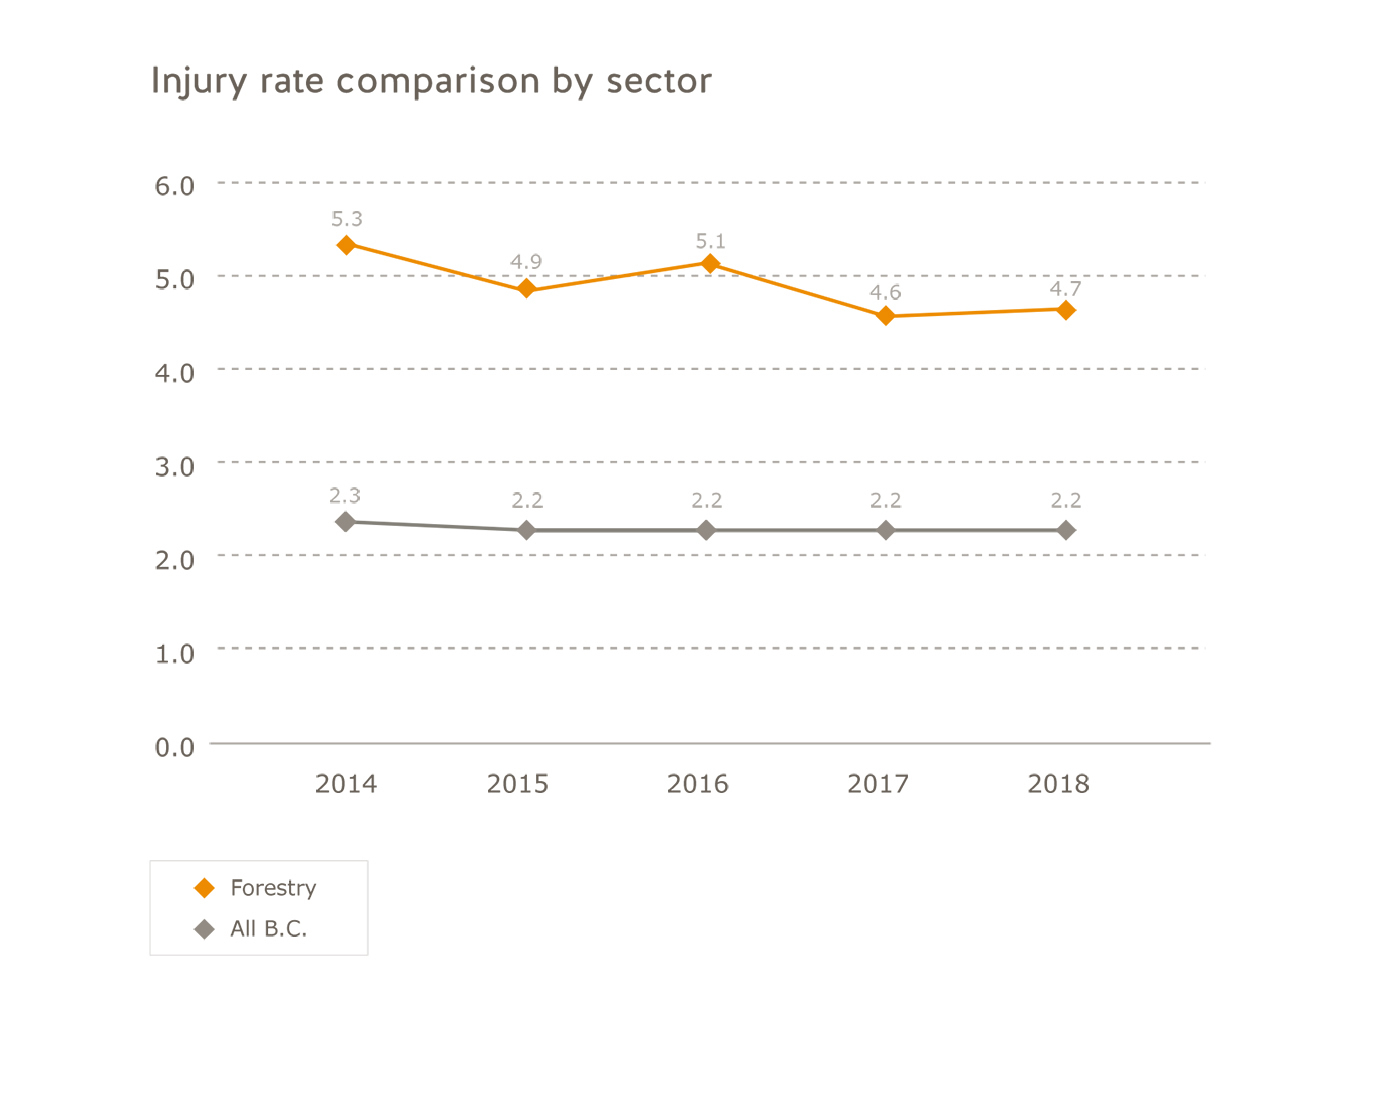 Forestry sector injury rate comparison by sector for 2014 to 2018. All B.C.: 2014=2.3; 2015=2.2; 2016=2.2; 2017=2.2; 2018=2.2. Forestry: 2014=5.3; 2015=4.9; 2016=5.1; 2017=4.6; 2018=4.7.